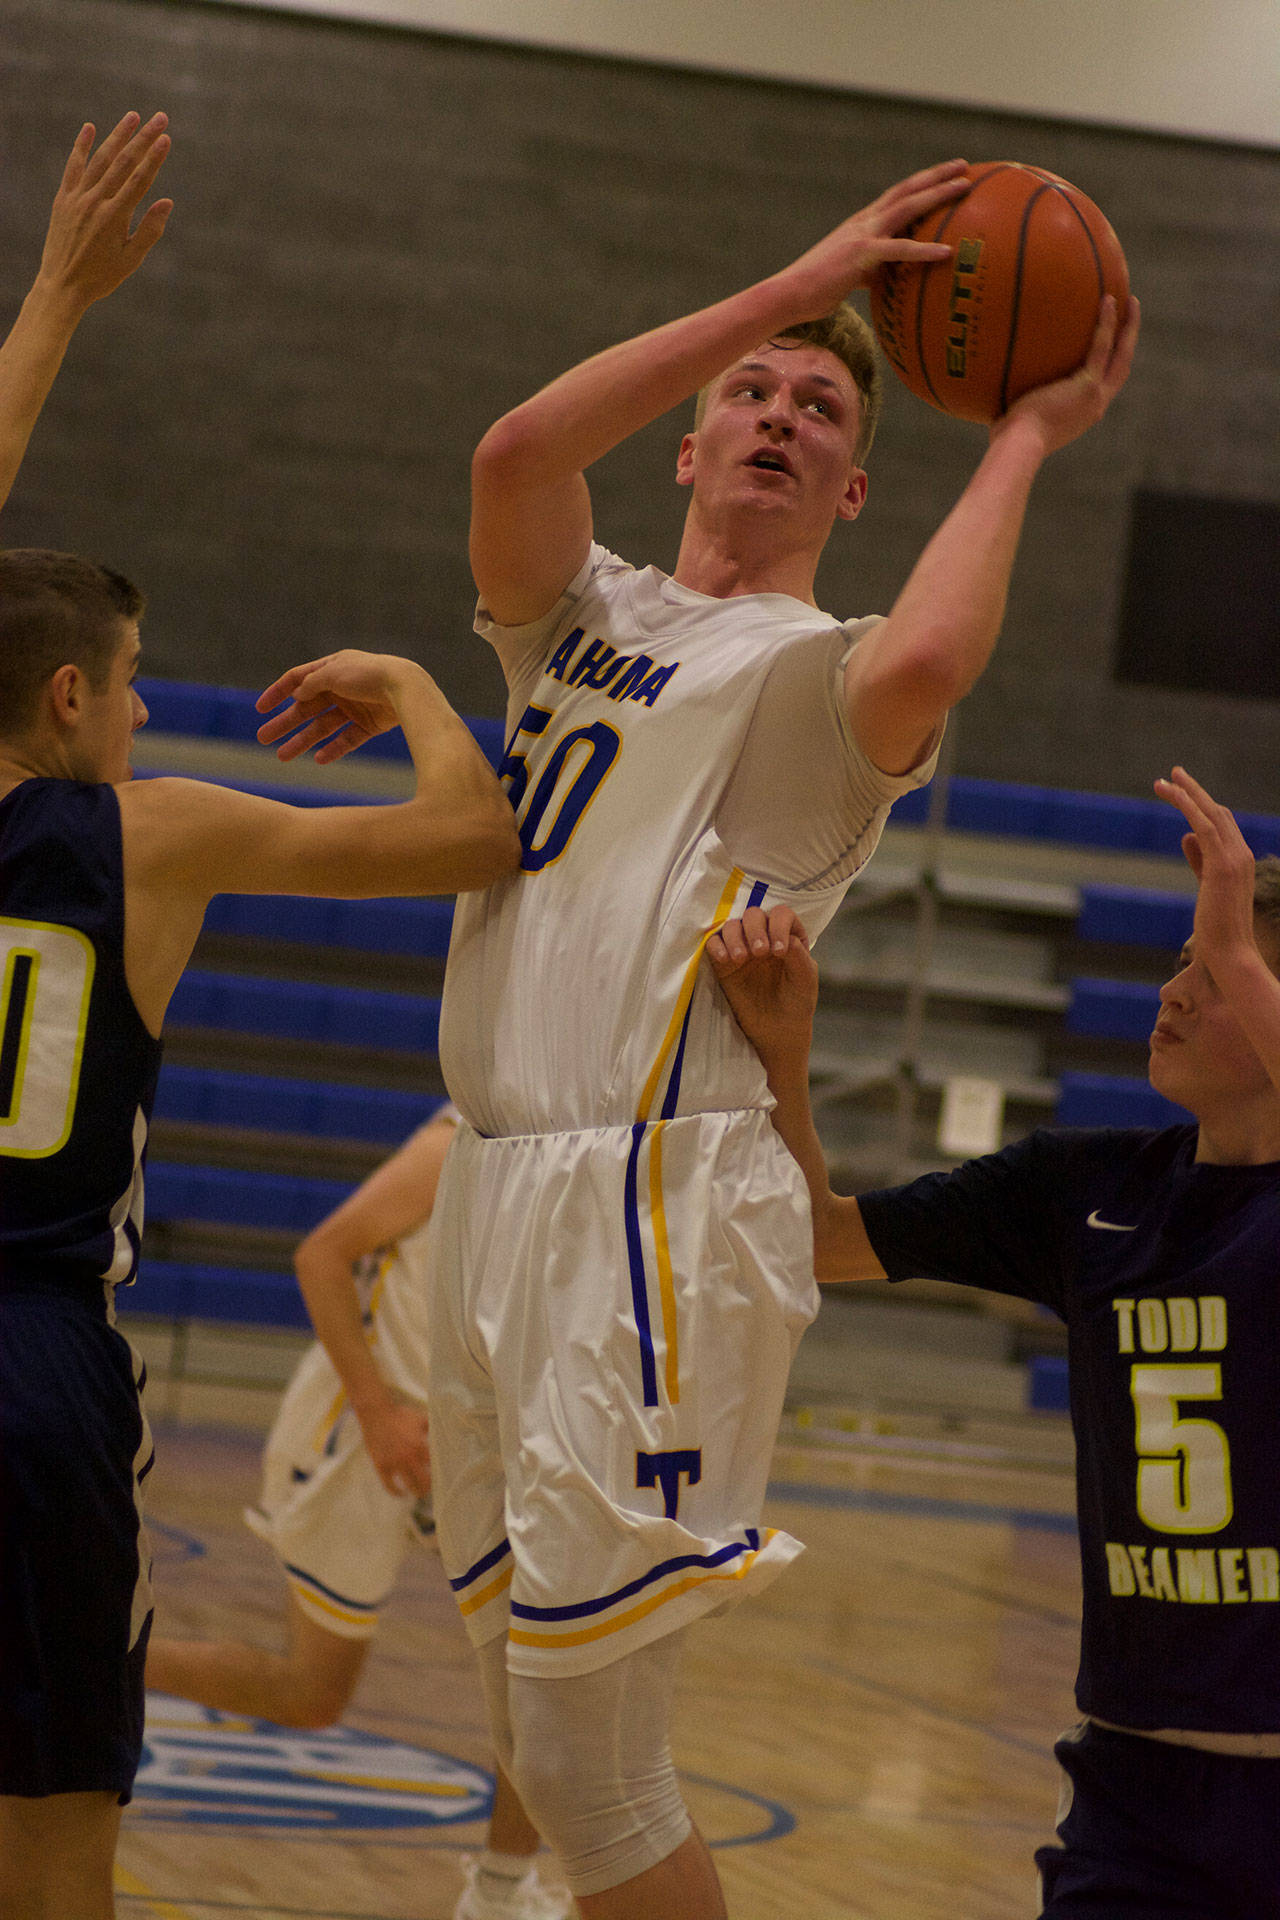 Tahoma senior Kimball Cottam goes up for a shot during Tuesday’s win over Todd Beamer. Photos by Kayse Angel